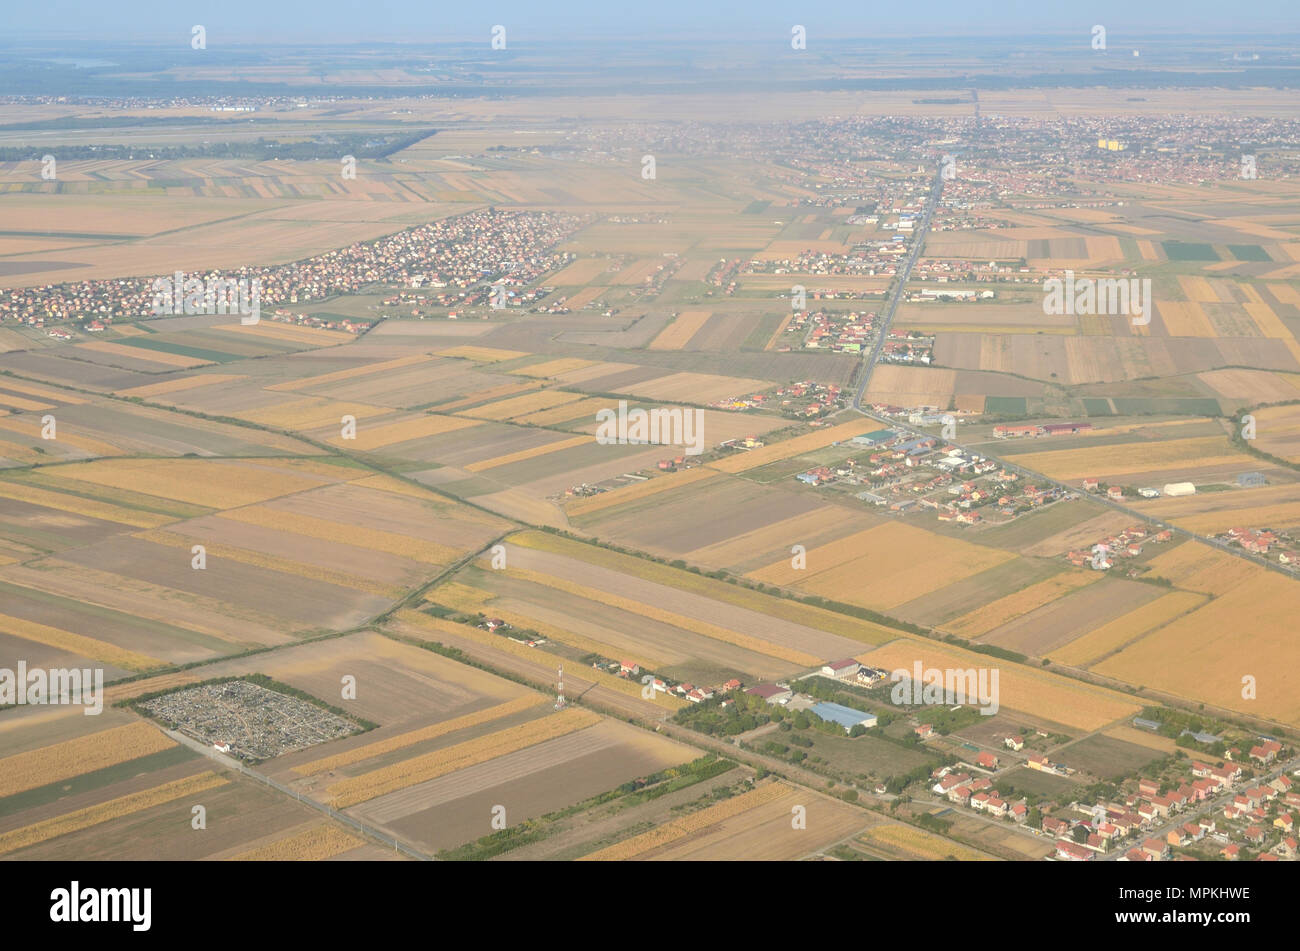 Plains with different plants and a city suburb seen from the air - Belgrade, Serbia Stock Photo